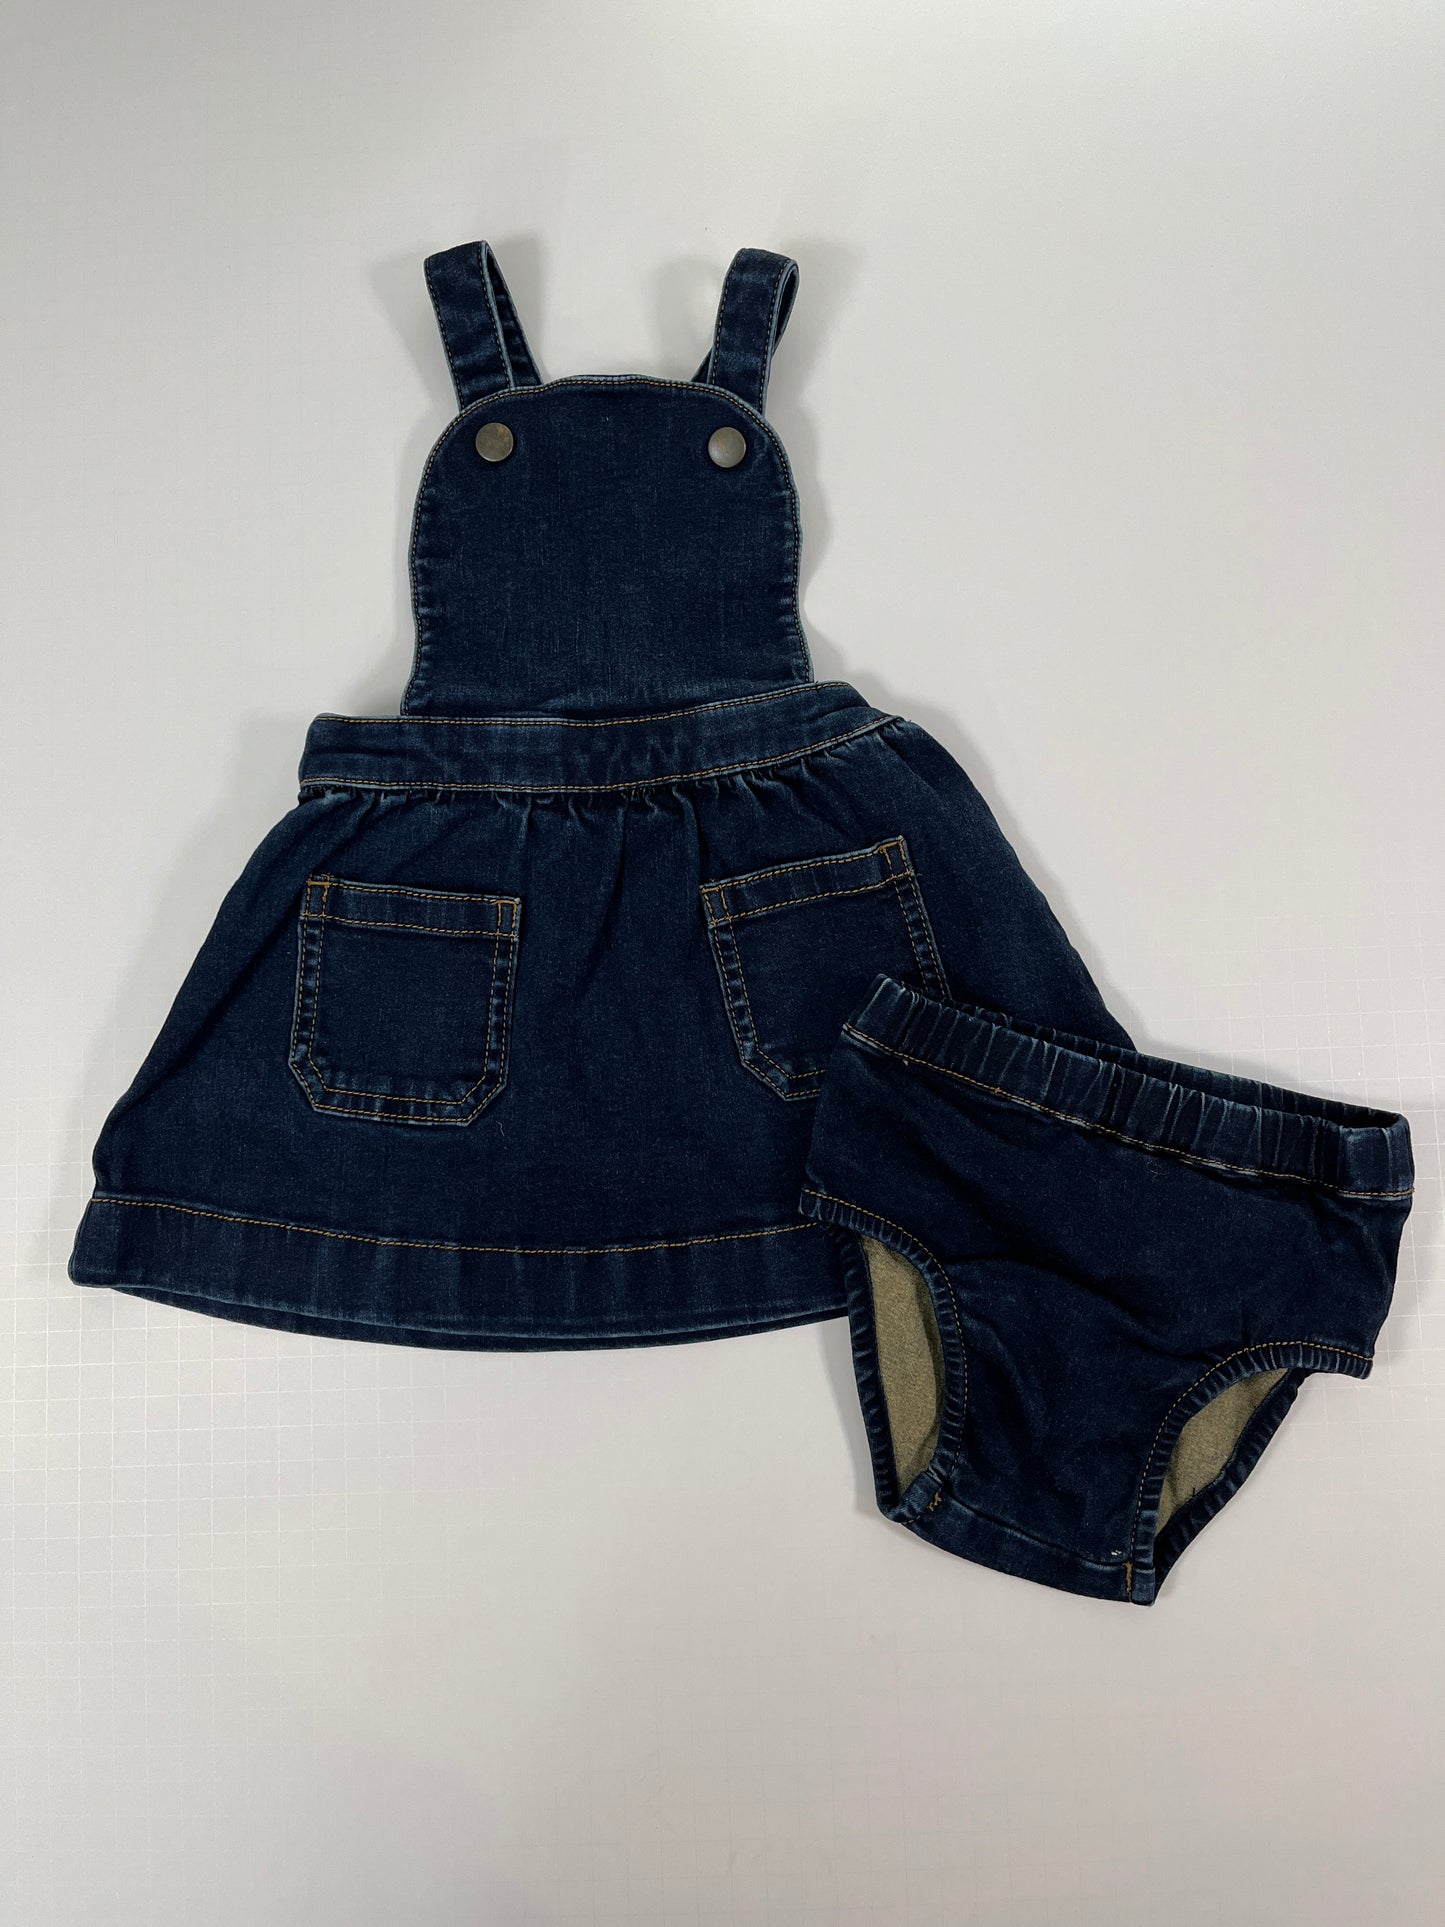 PPU 45242 Hanna Andersson 12-18m denim jumper and bloomers